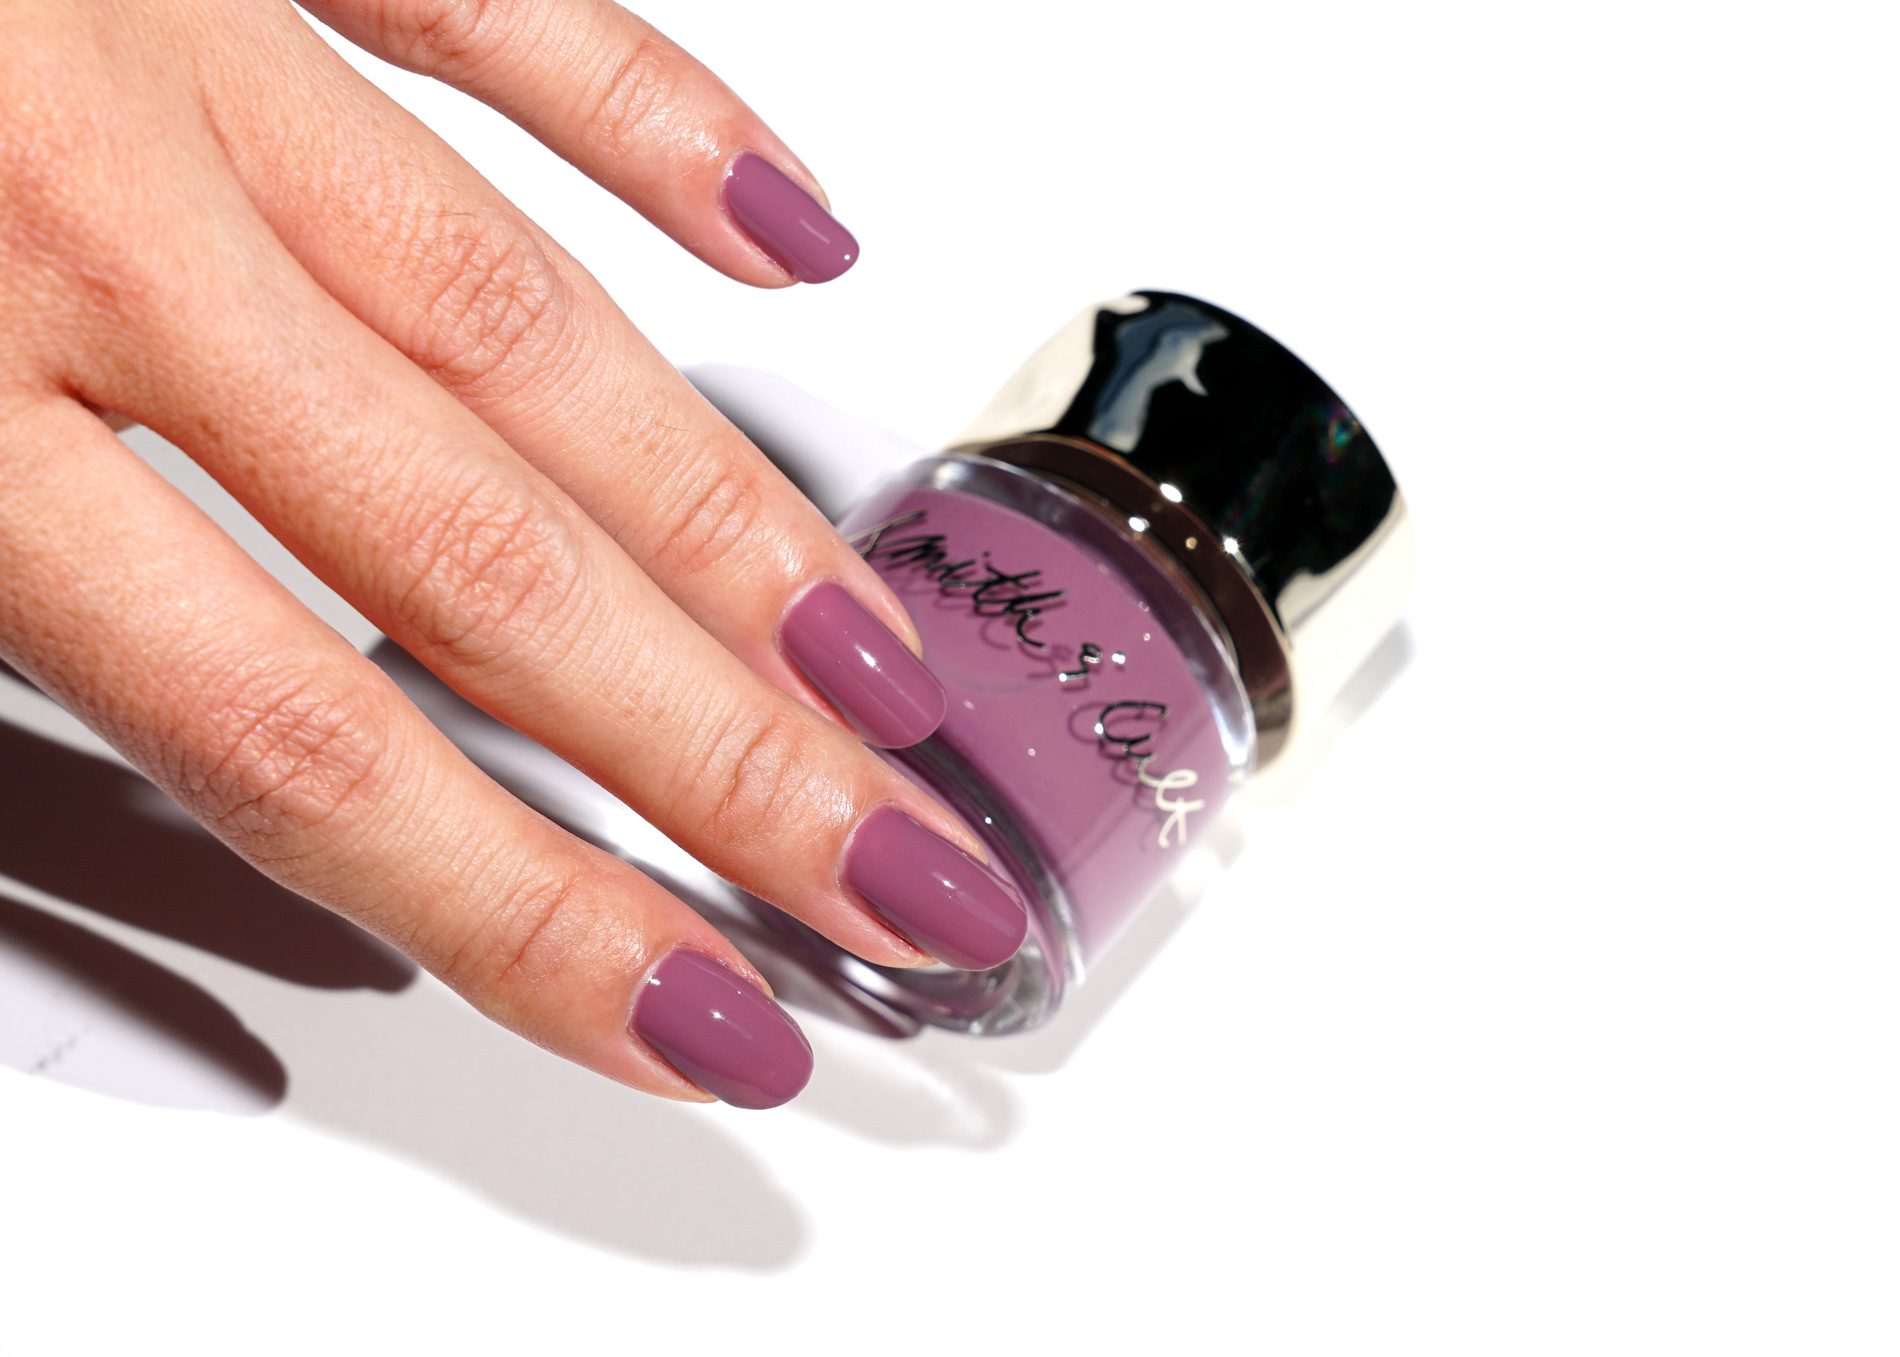 2. "Smith and Cult Nail Polish in Pillow Pie" - wide 4